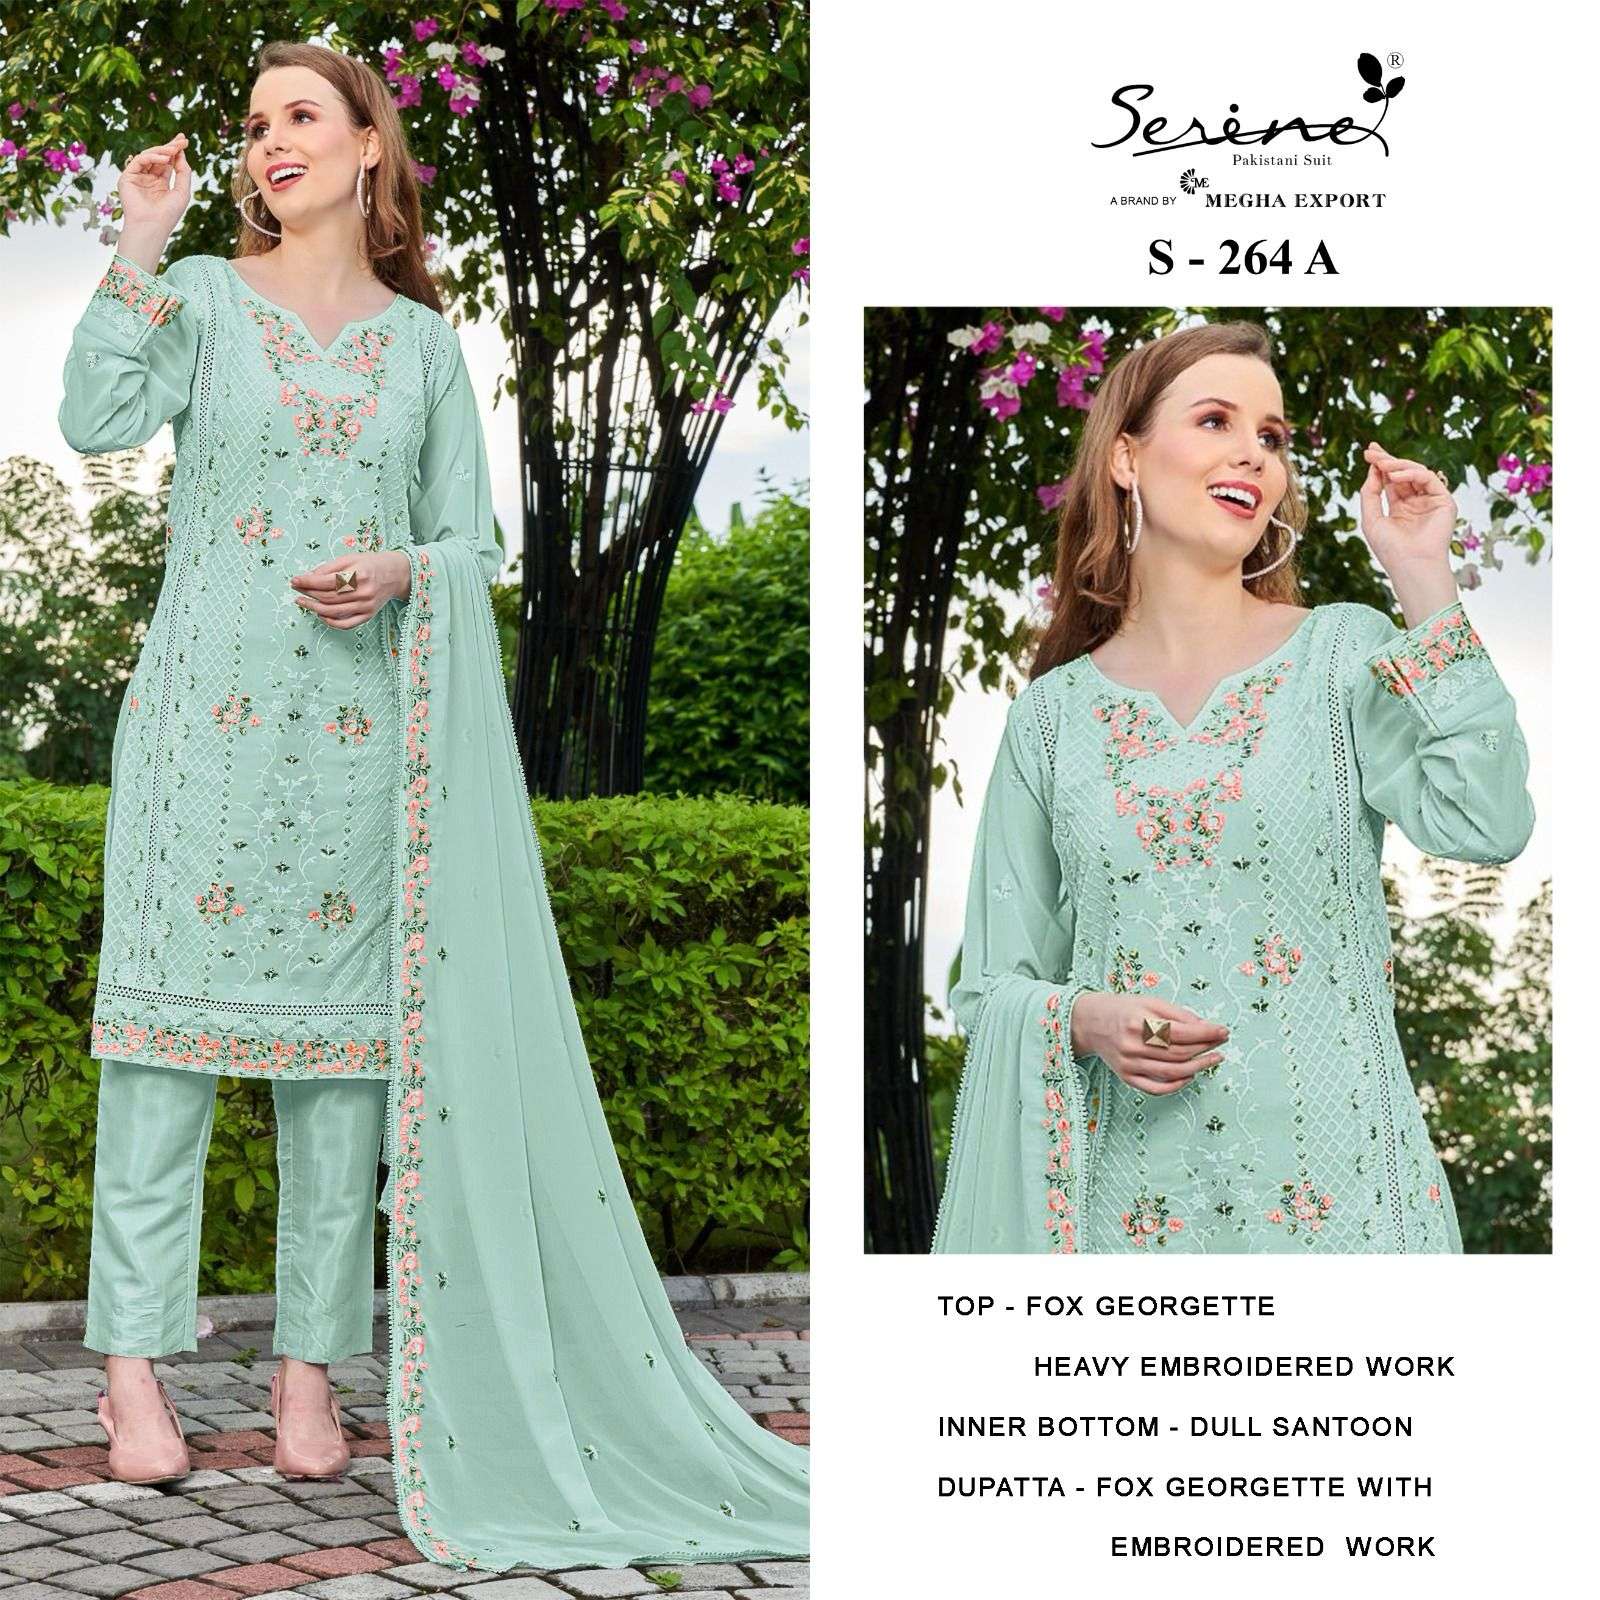 S-264 COLOURS BY SERENE DESIGNER FAUX GEORGETTE EMBROIDERY PAKISTANI DRESS